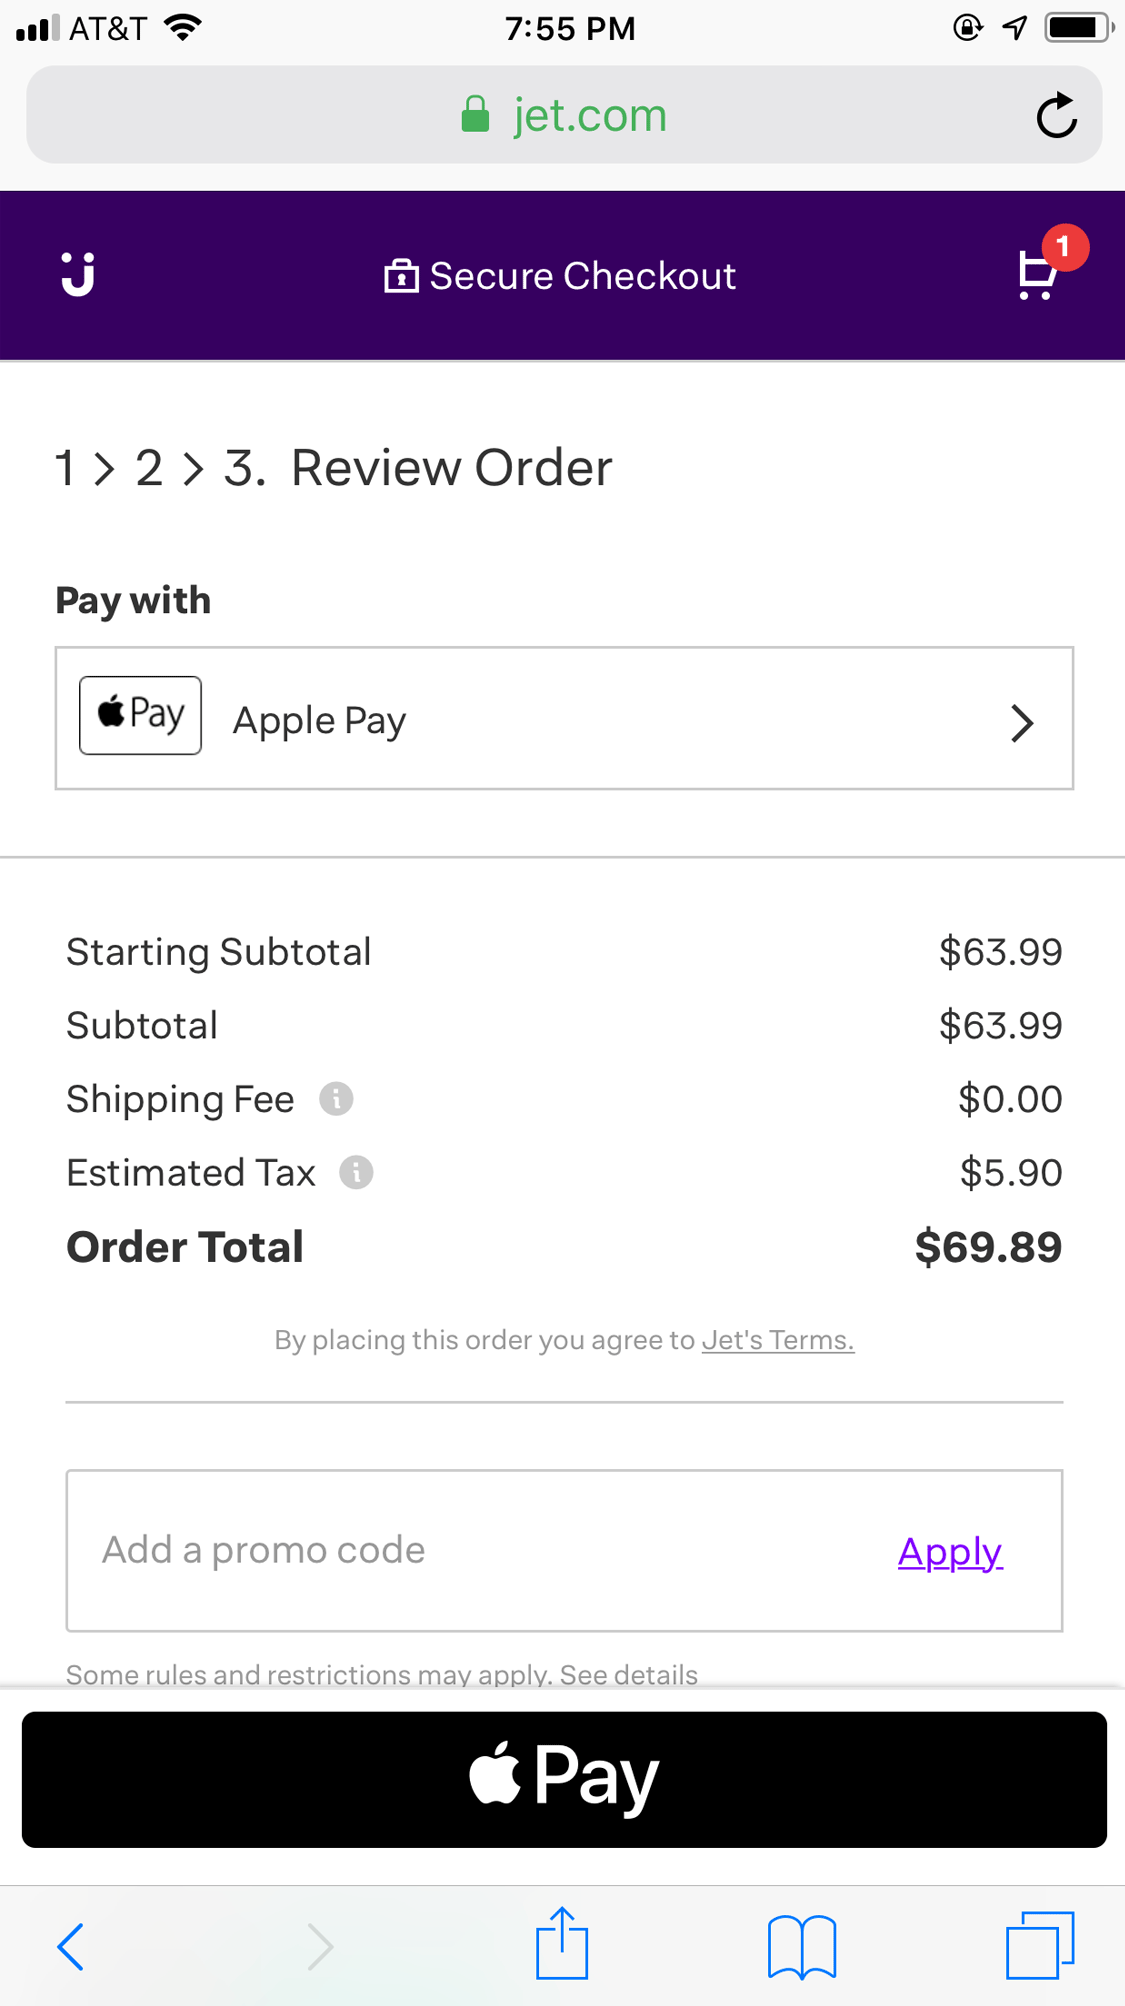 Jet.com makes it easy to see your order summary